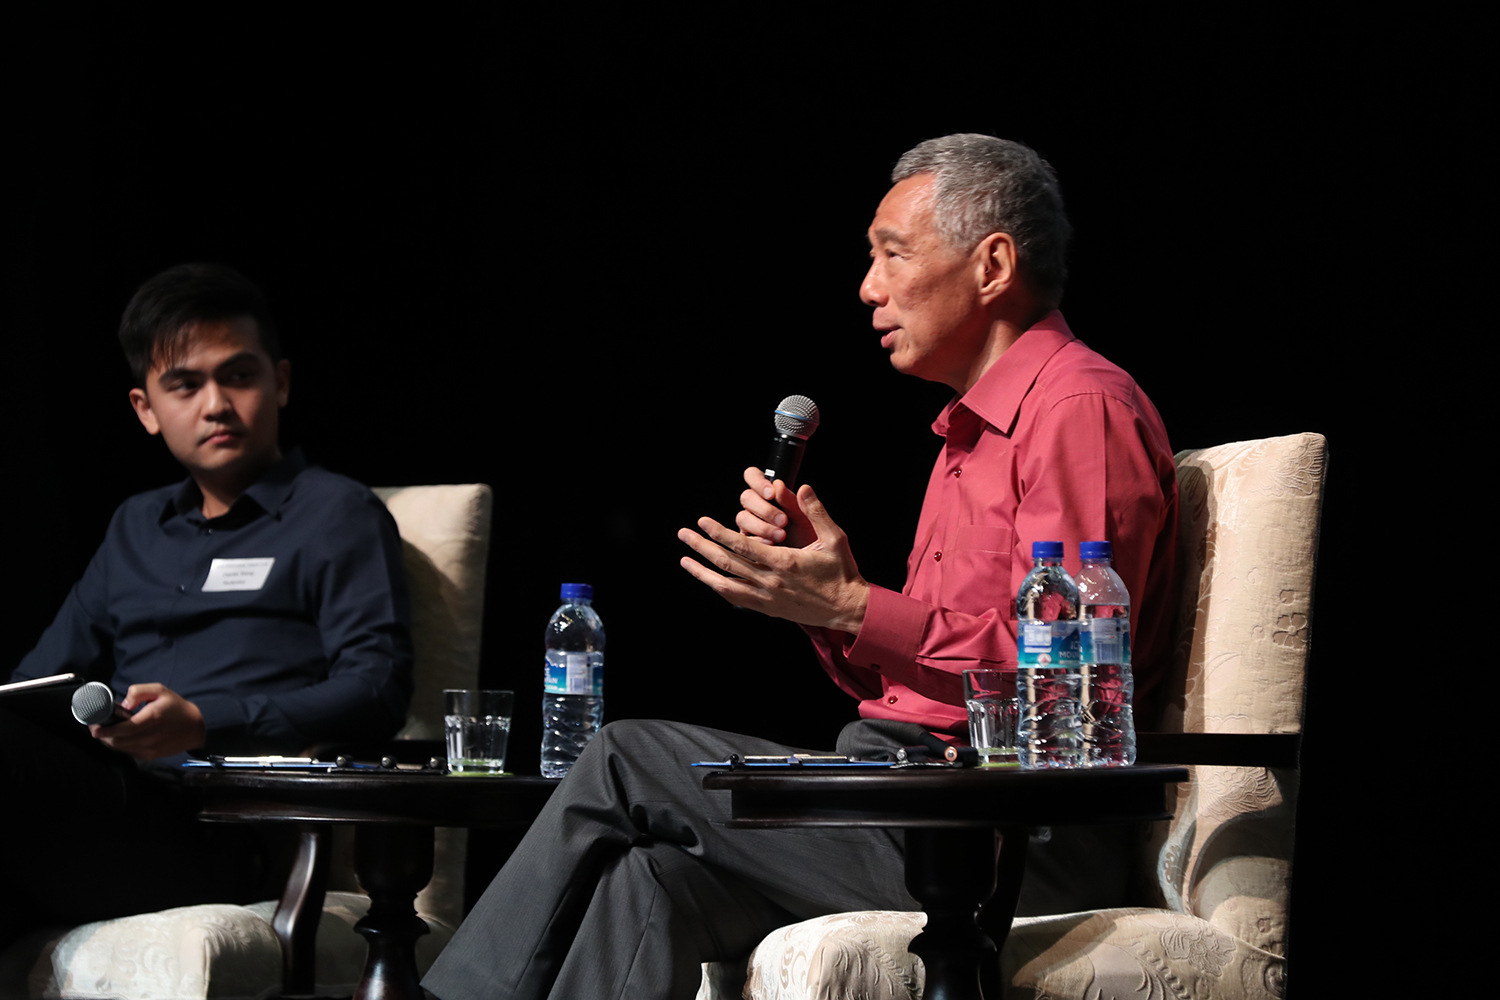 Dialogue with PM Lee Hsien Loong at the SUTD Ministerial Forum on 5 Apr 2018 (MCI Photo by LH Goh)